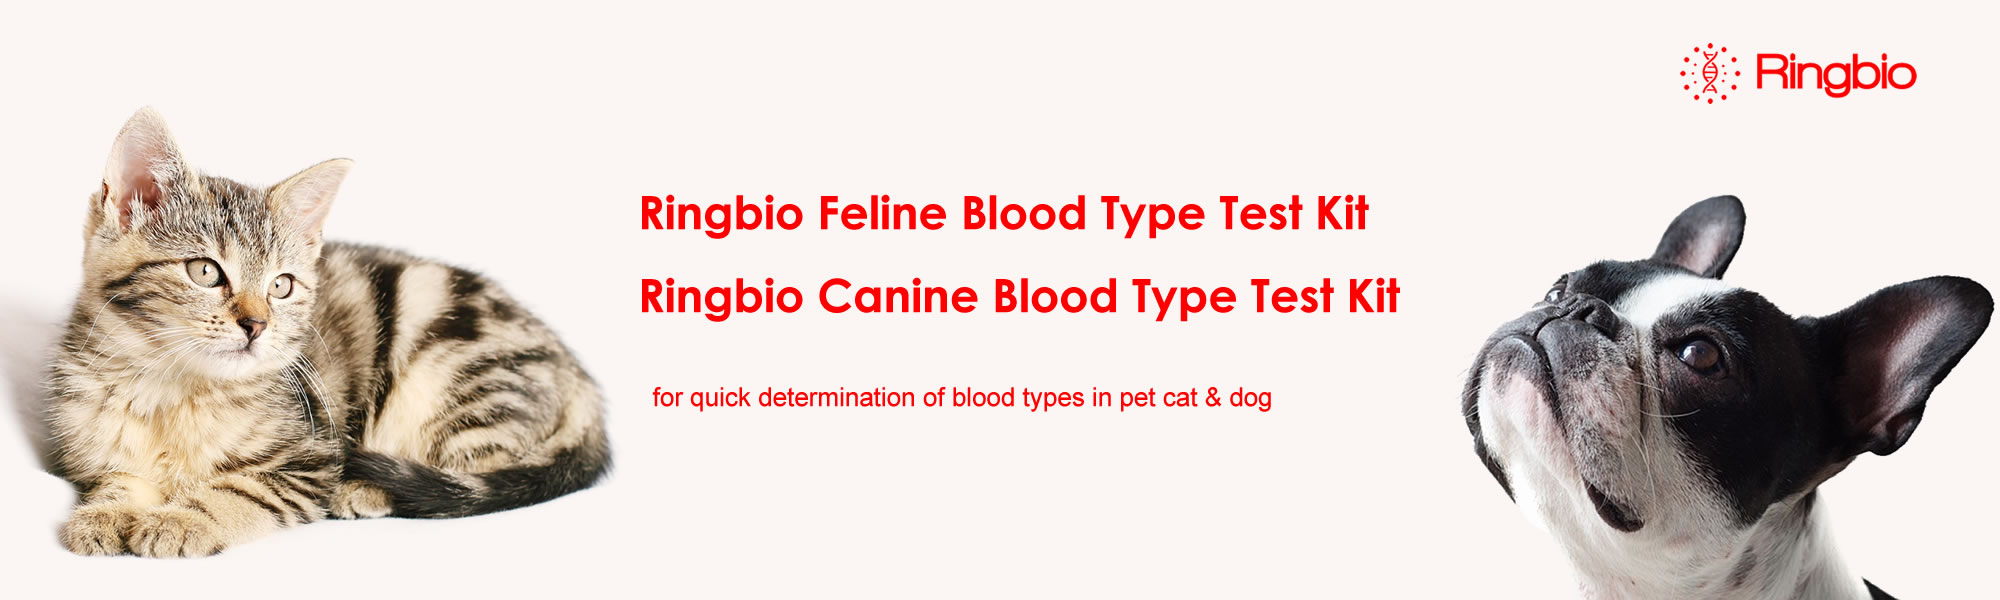 Ringbio Feline and Canine Blood Type Rapid Test Kits are for sale.